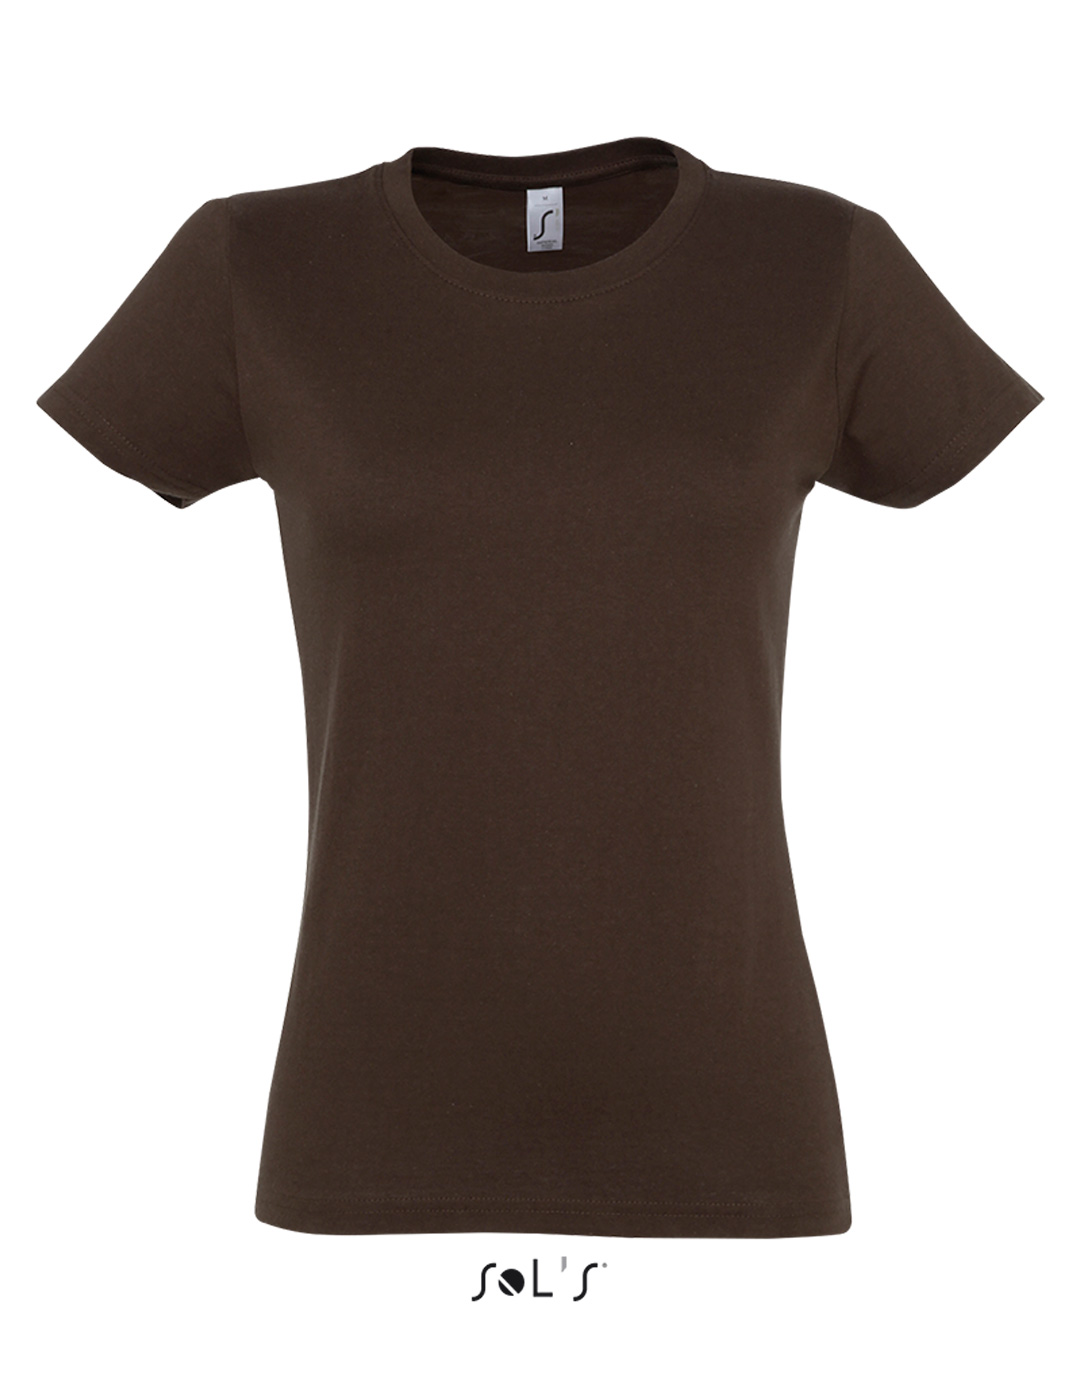 Imperial women 11502 chocolate a